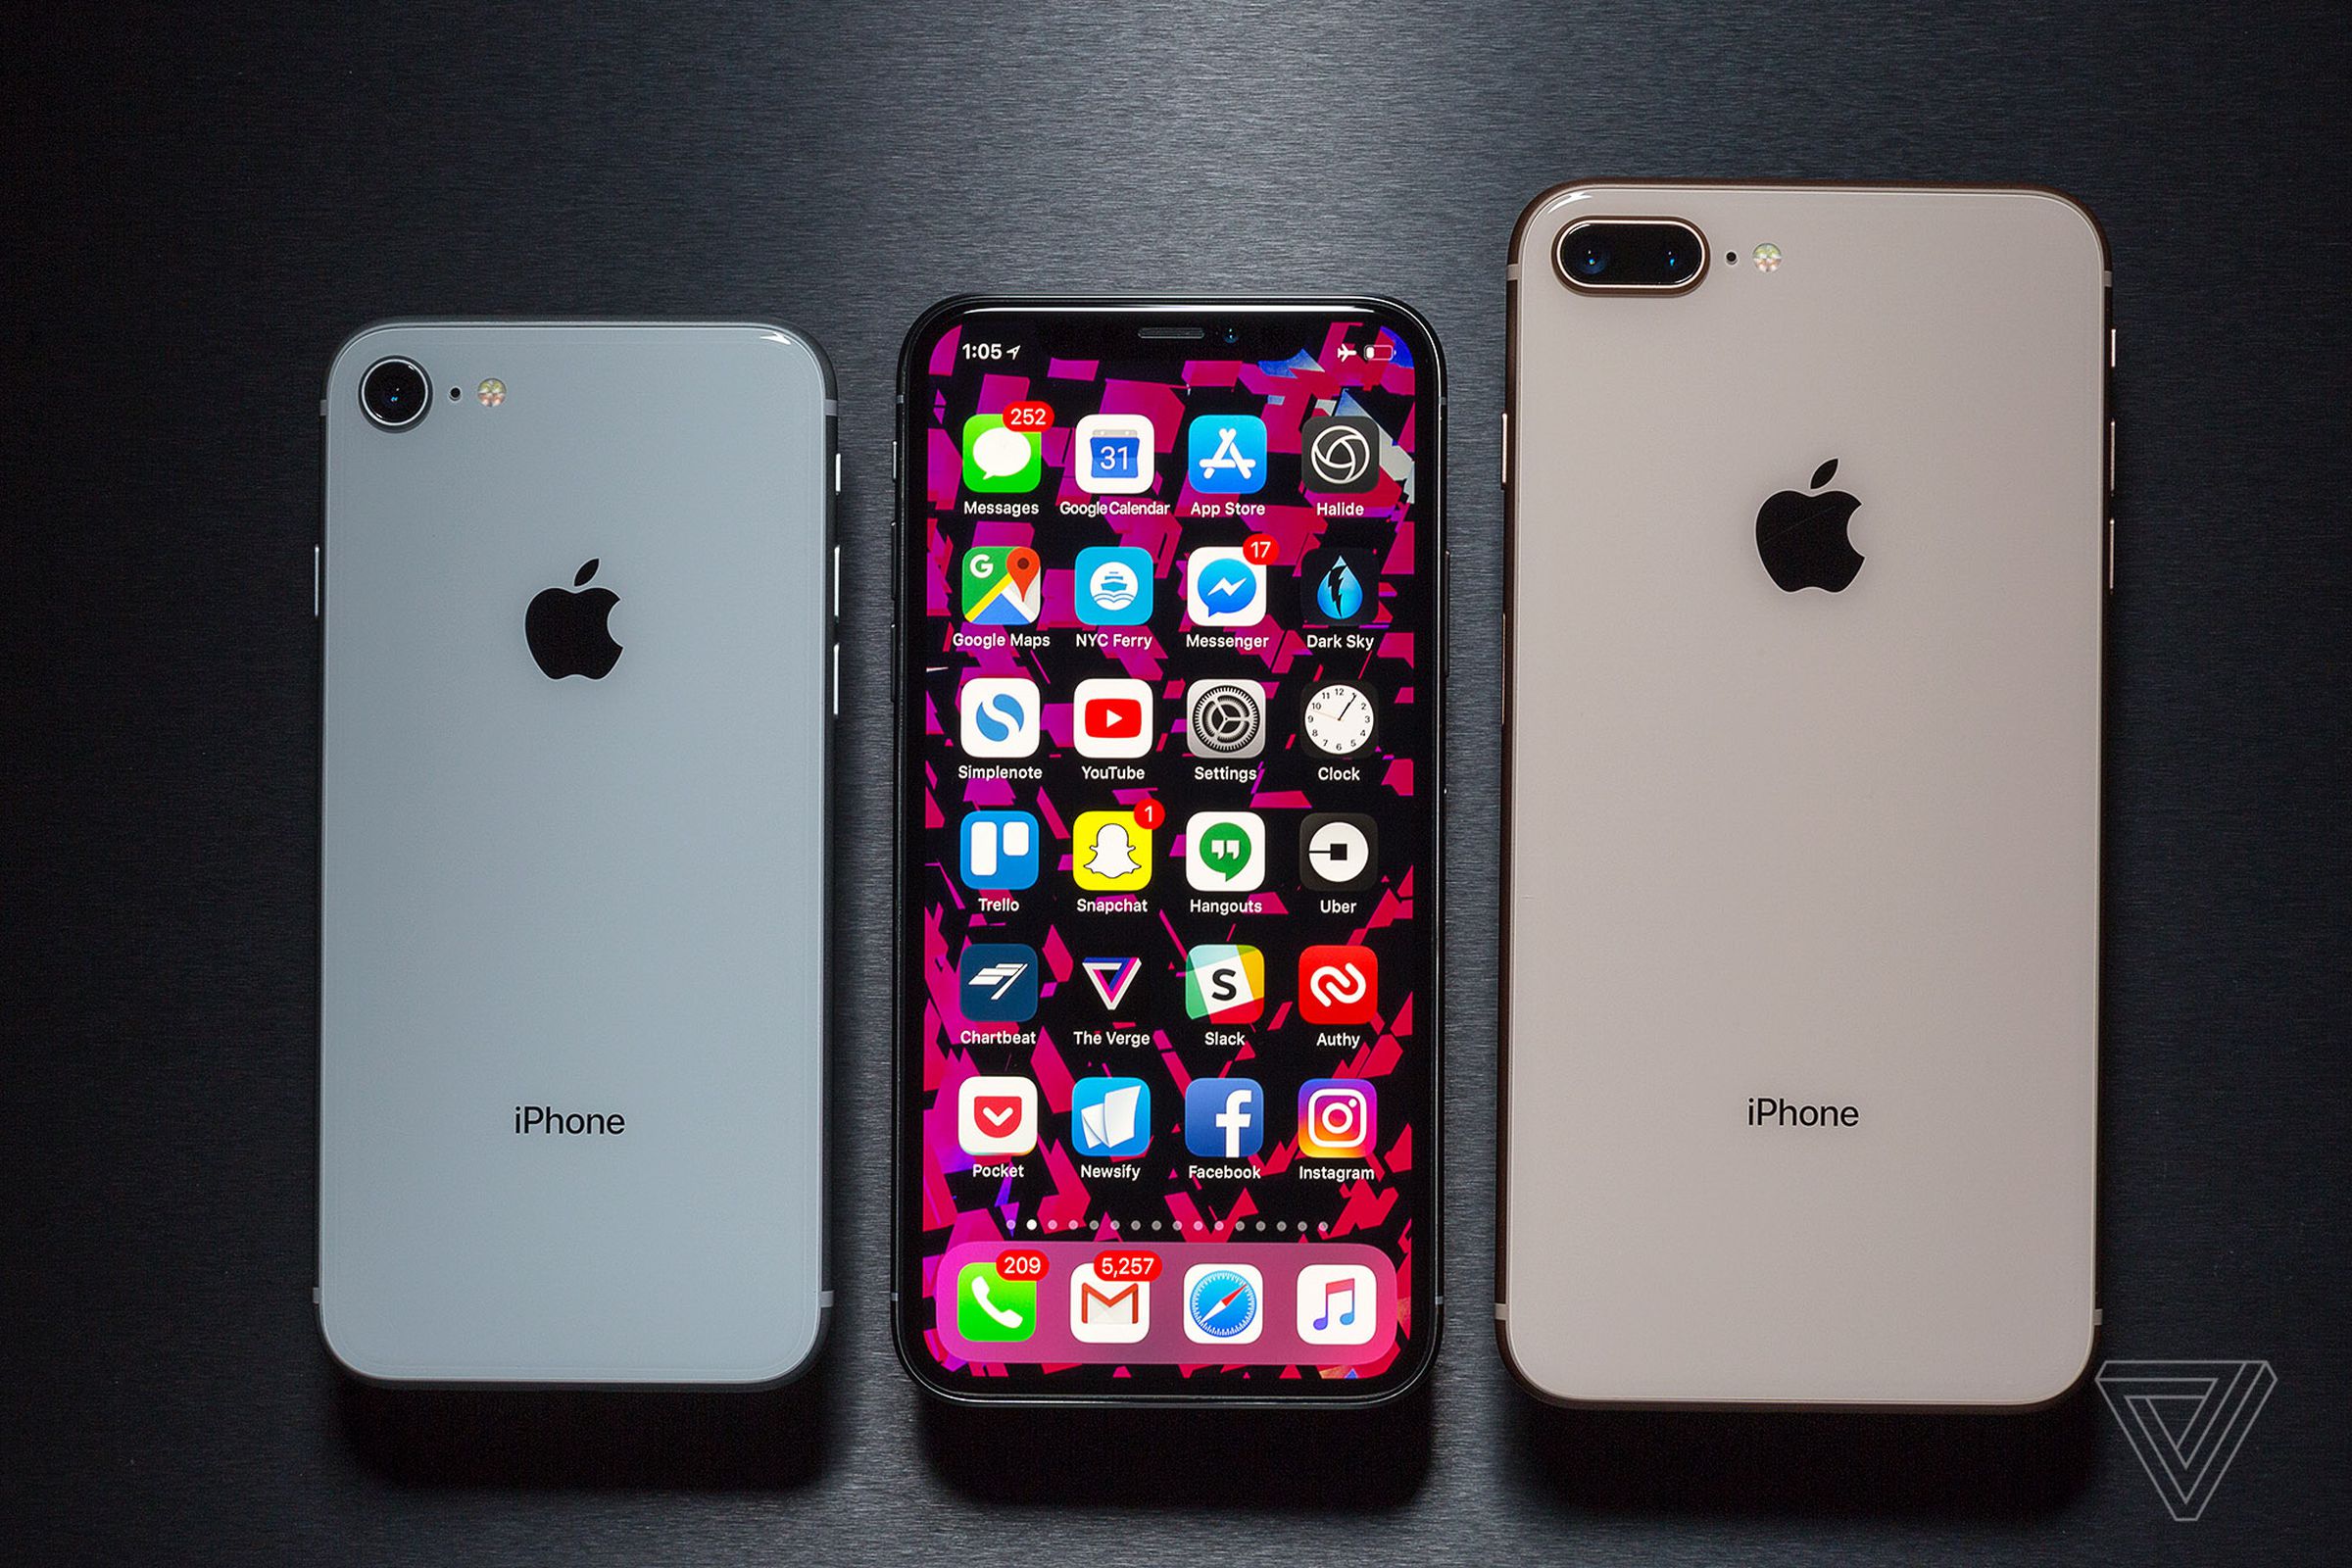 iPhone X between iPhone 8 and 8 Plus.